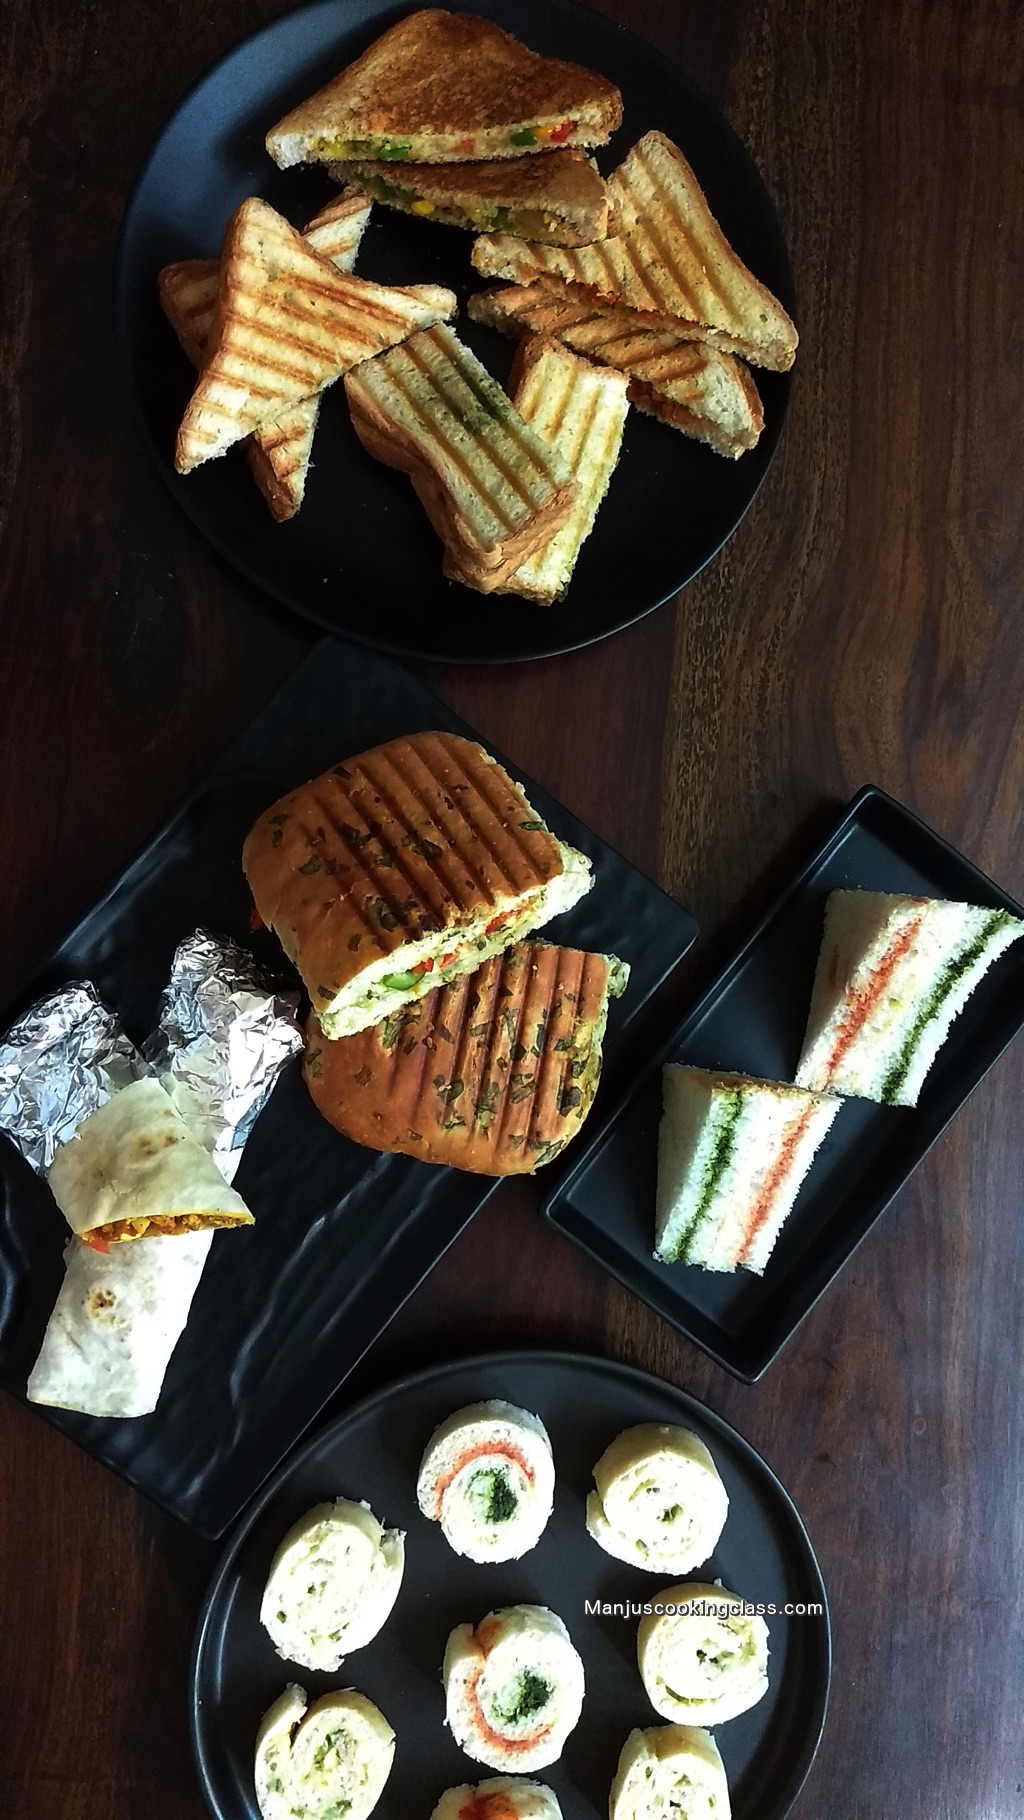 Vegetarian Sandwiches and Wraps Class